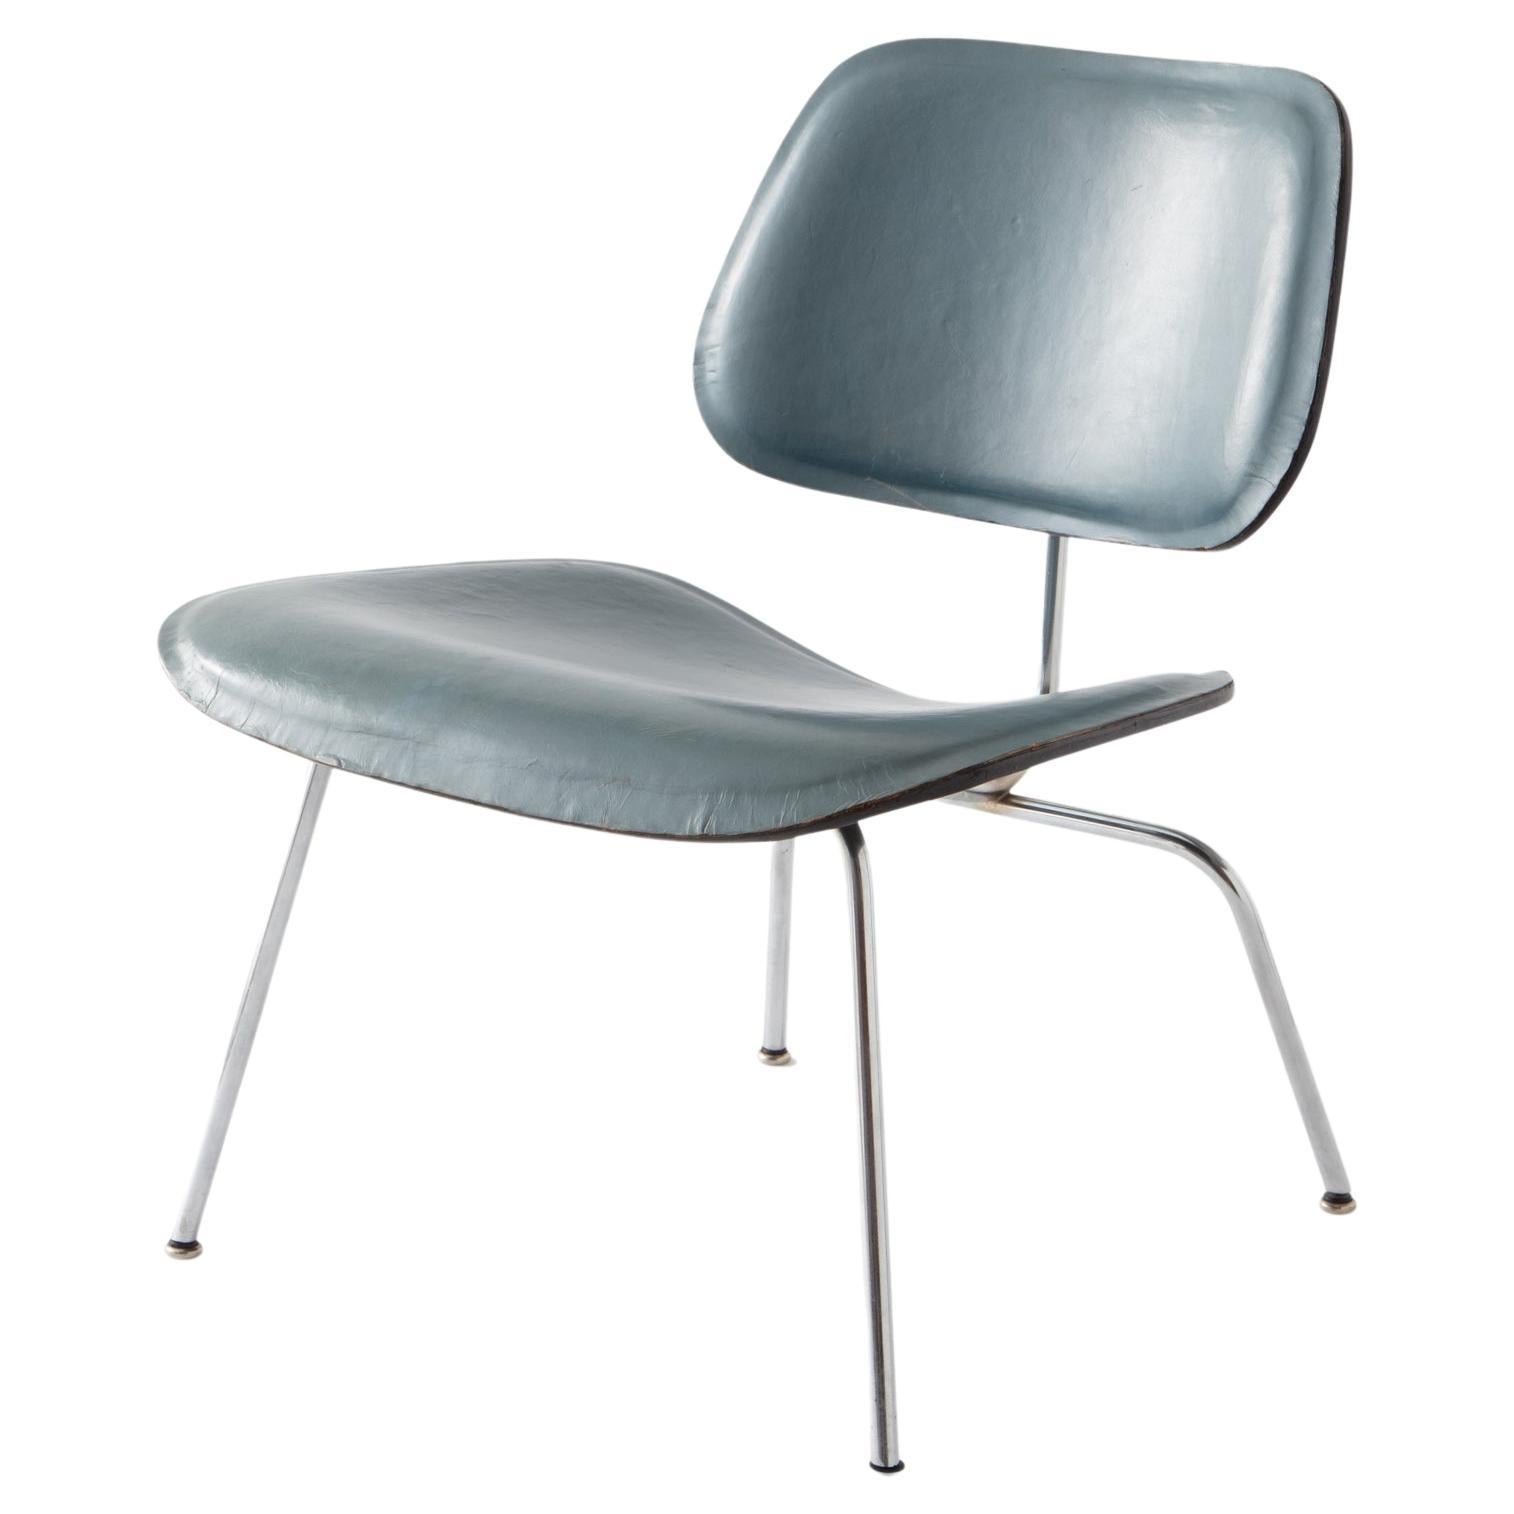 LCM 'Lounge Chair Metal' by Charles and Ray Eames For Sale